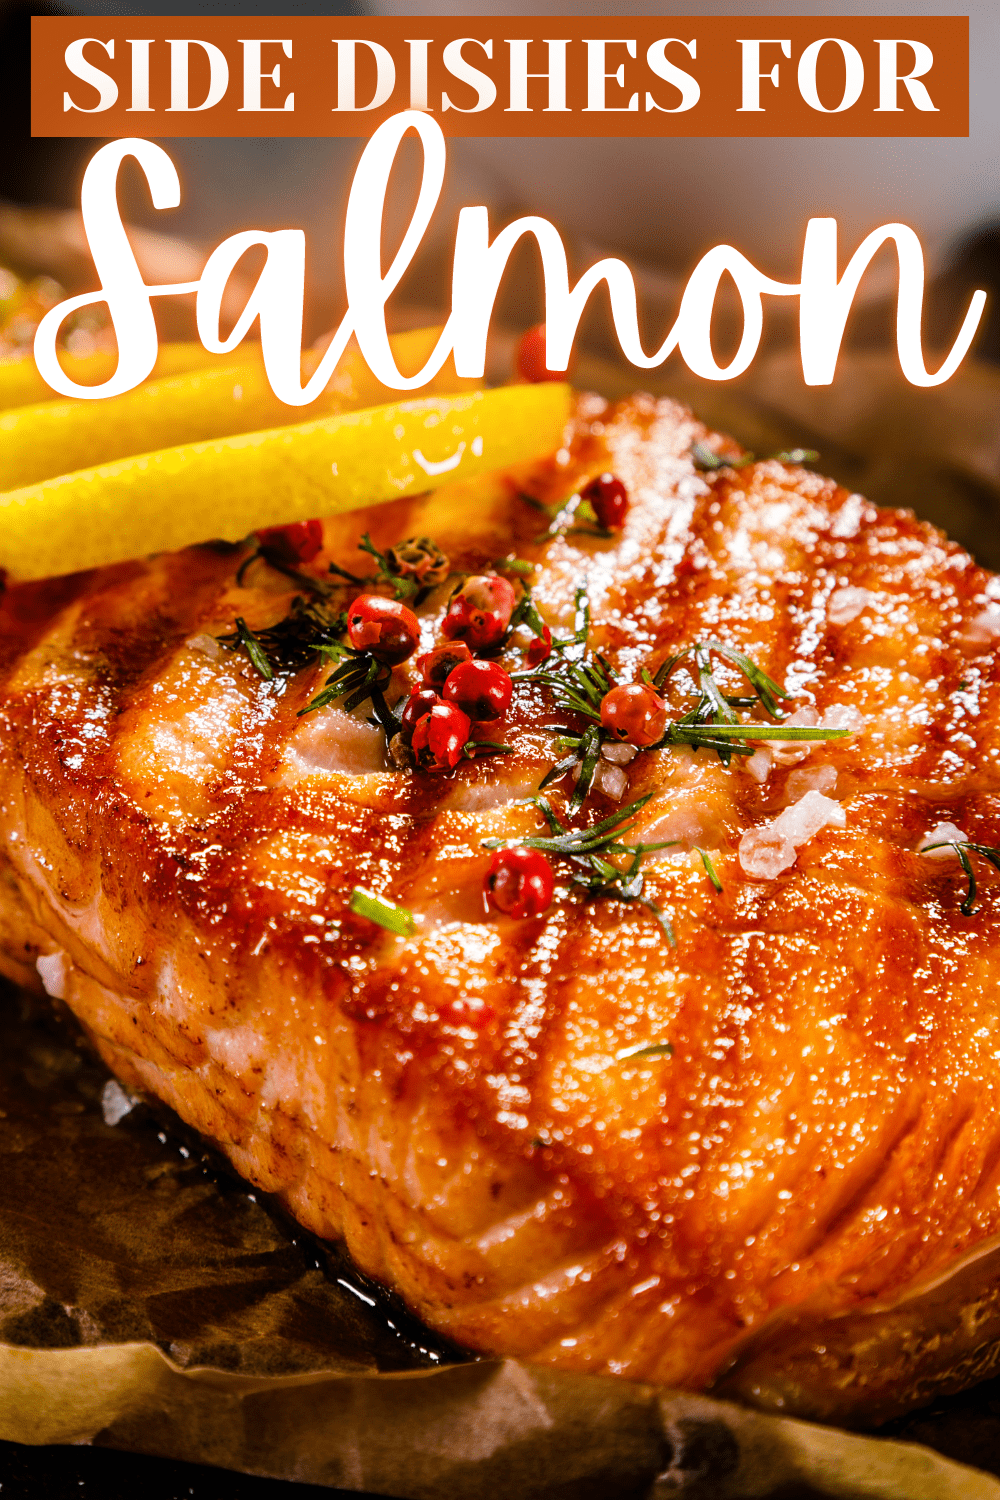 23 Best Side Dishes For Salmon - Insanely Good